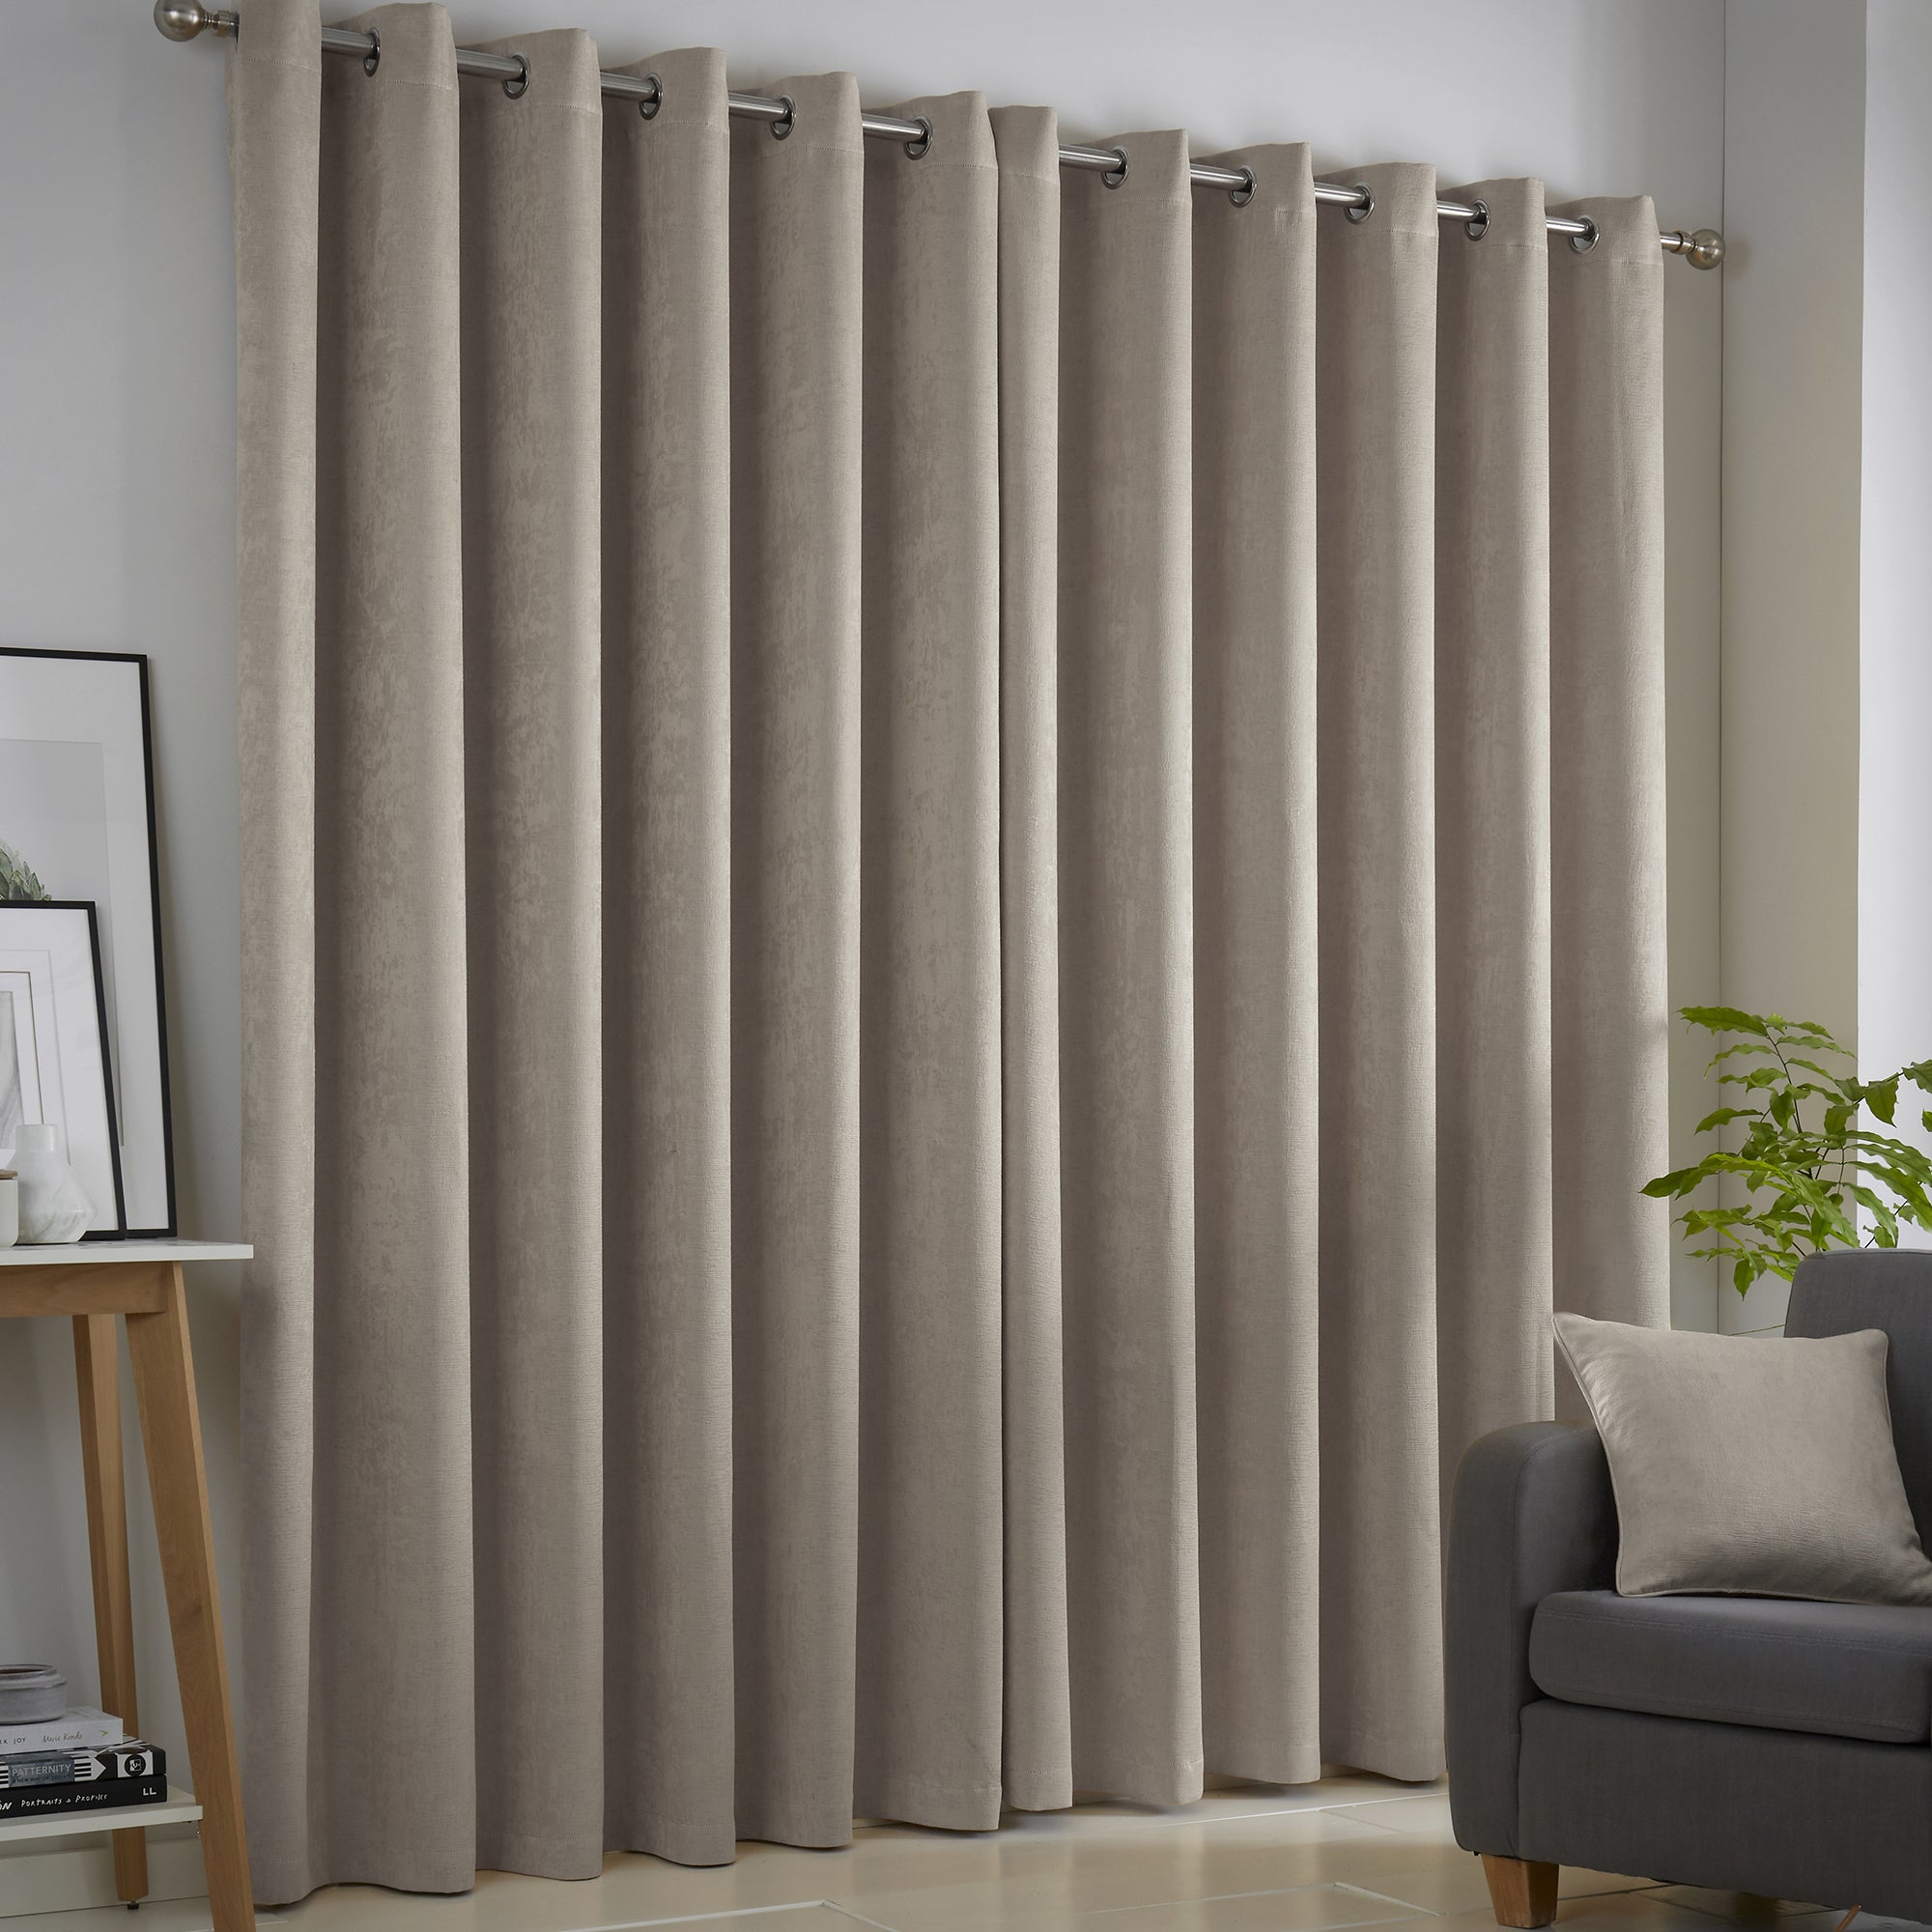 Strata - Blockout Pair of Eyelet Curtains in Natural - by Fusion